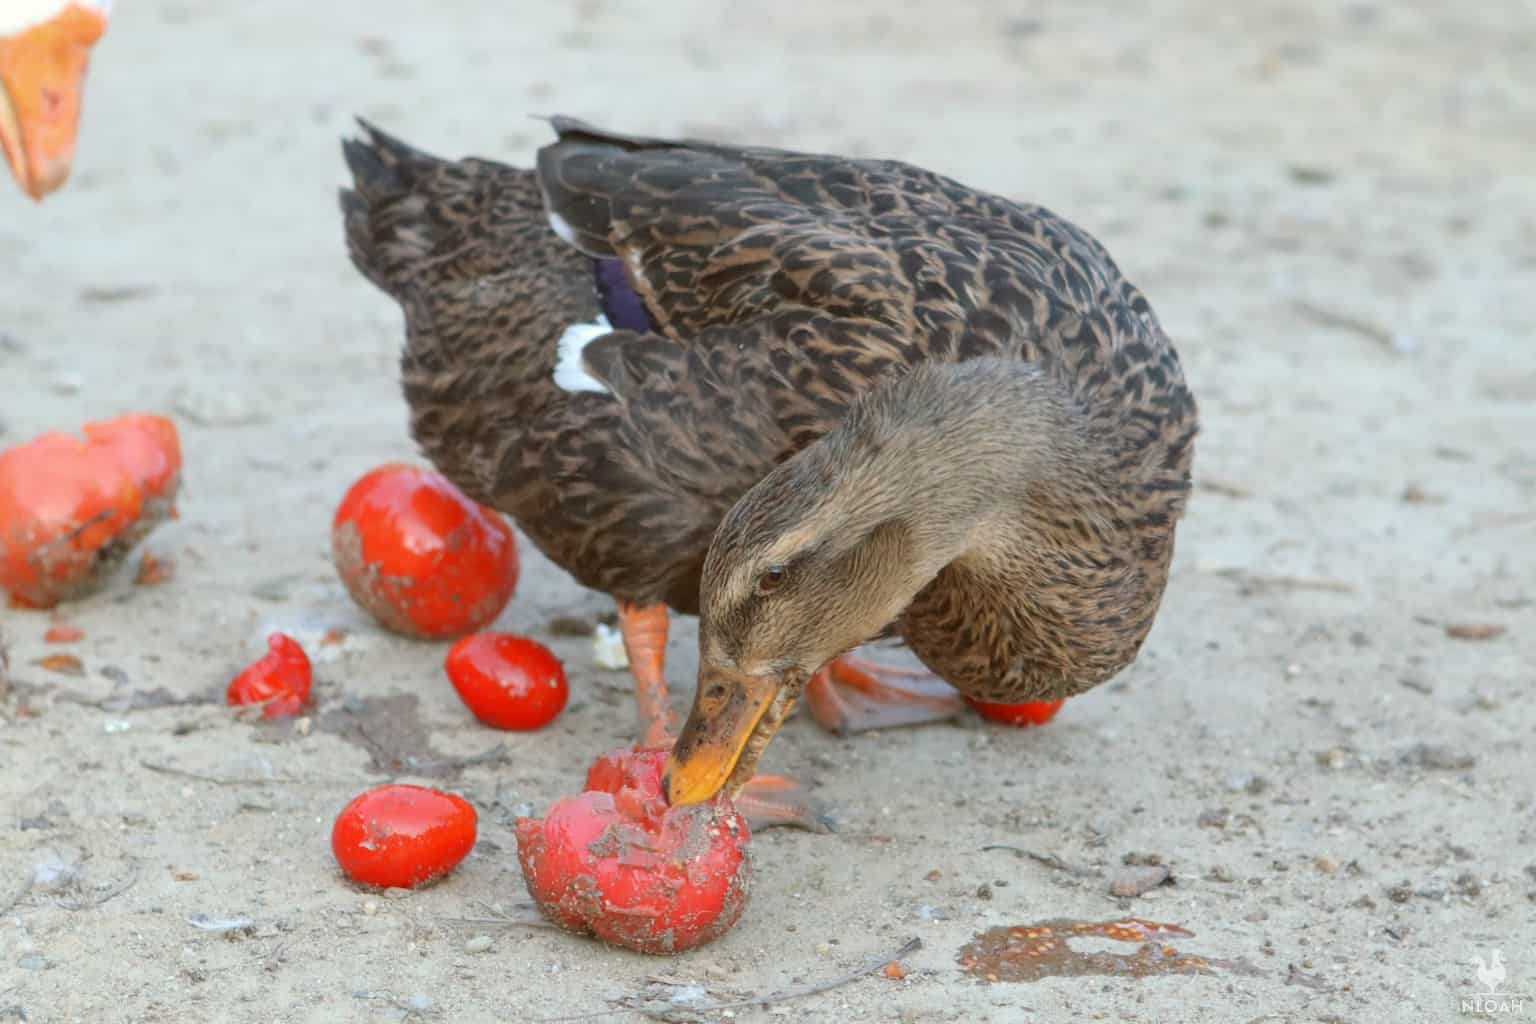 a duck eating tomatoes